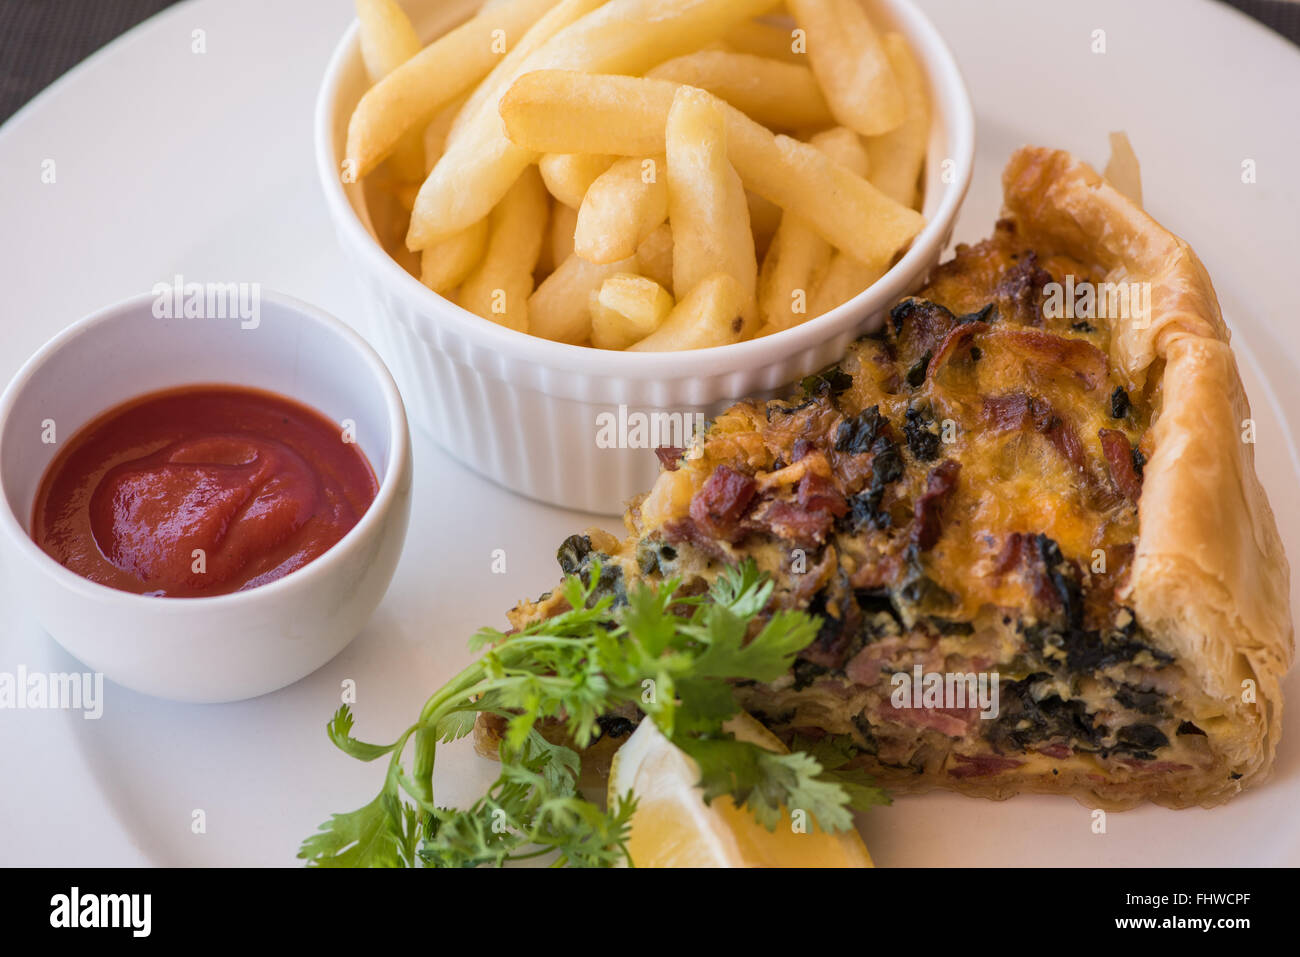 Homemade quiche with chips and tomato sauce Stock Photo